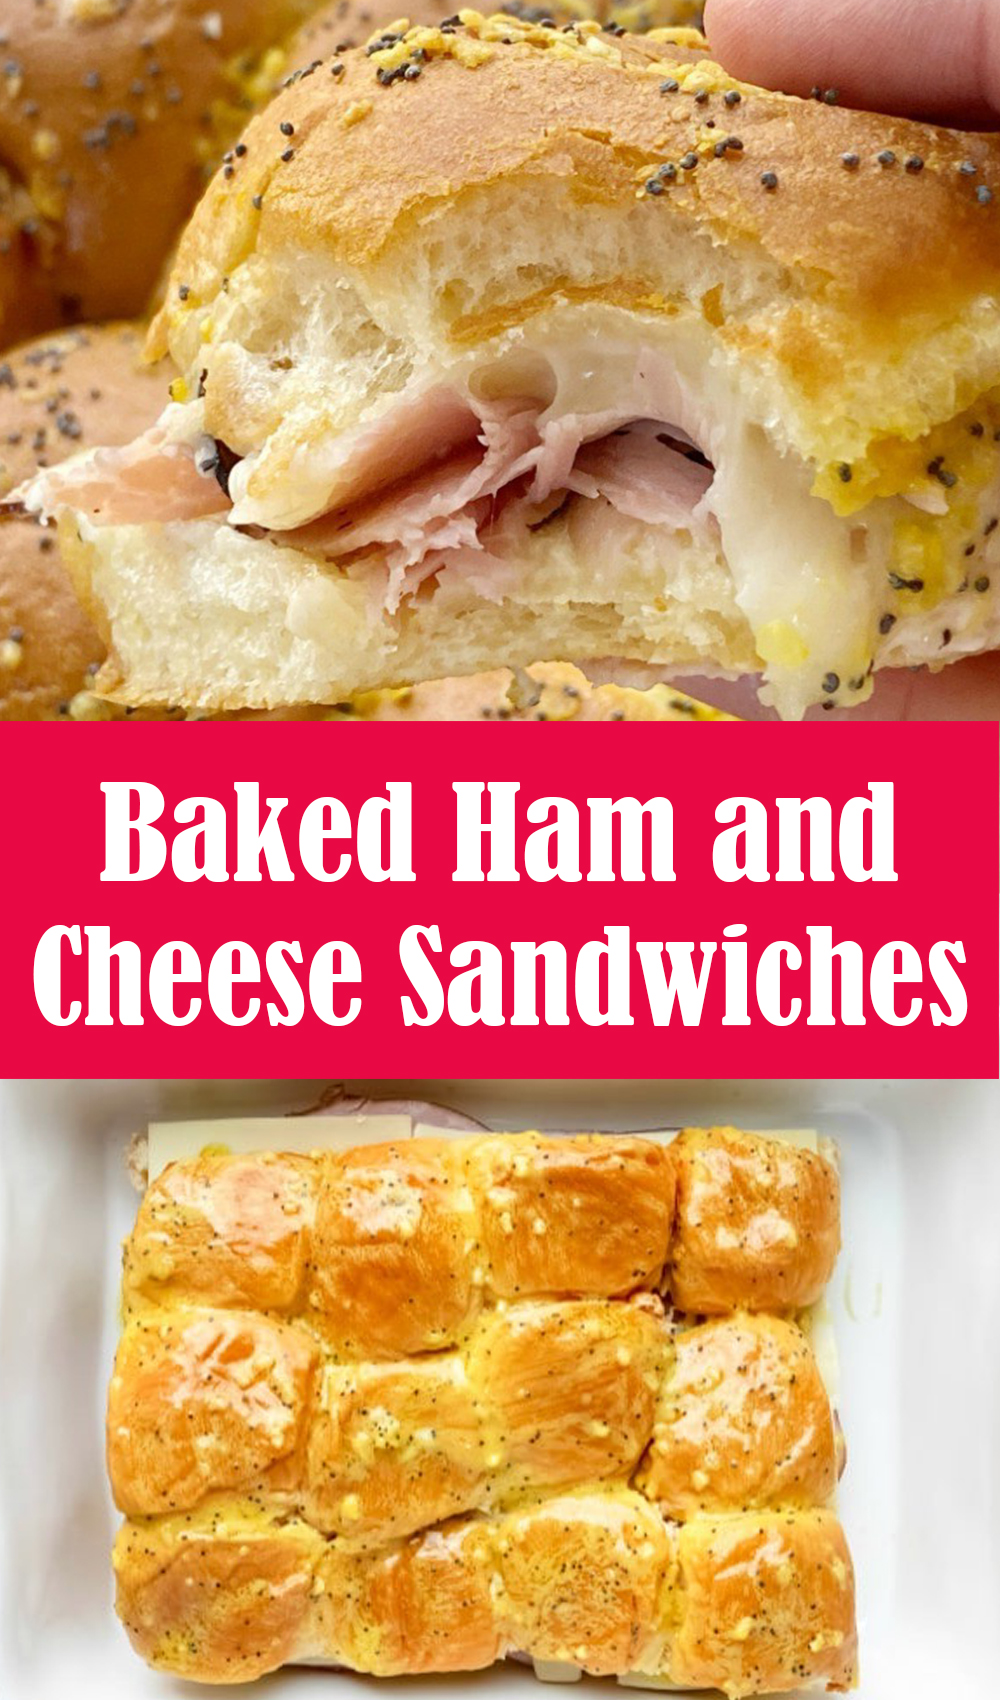 Delicious Baked Ham and Cheese Sandwiches